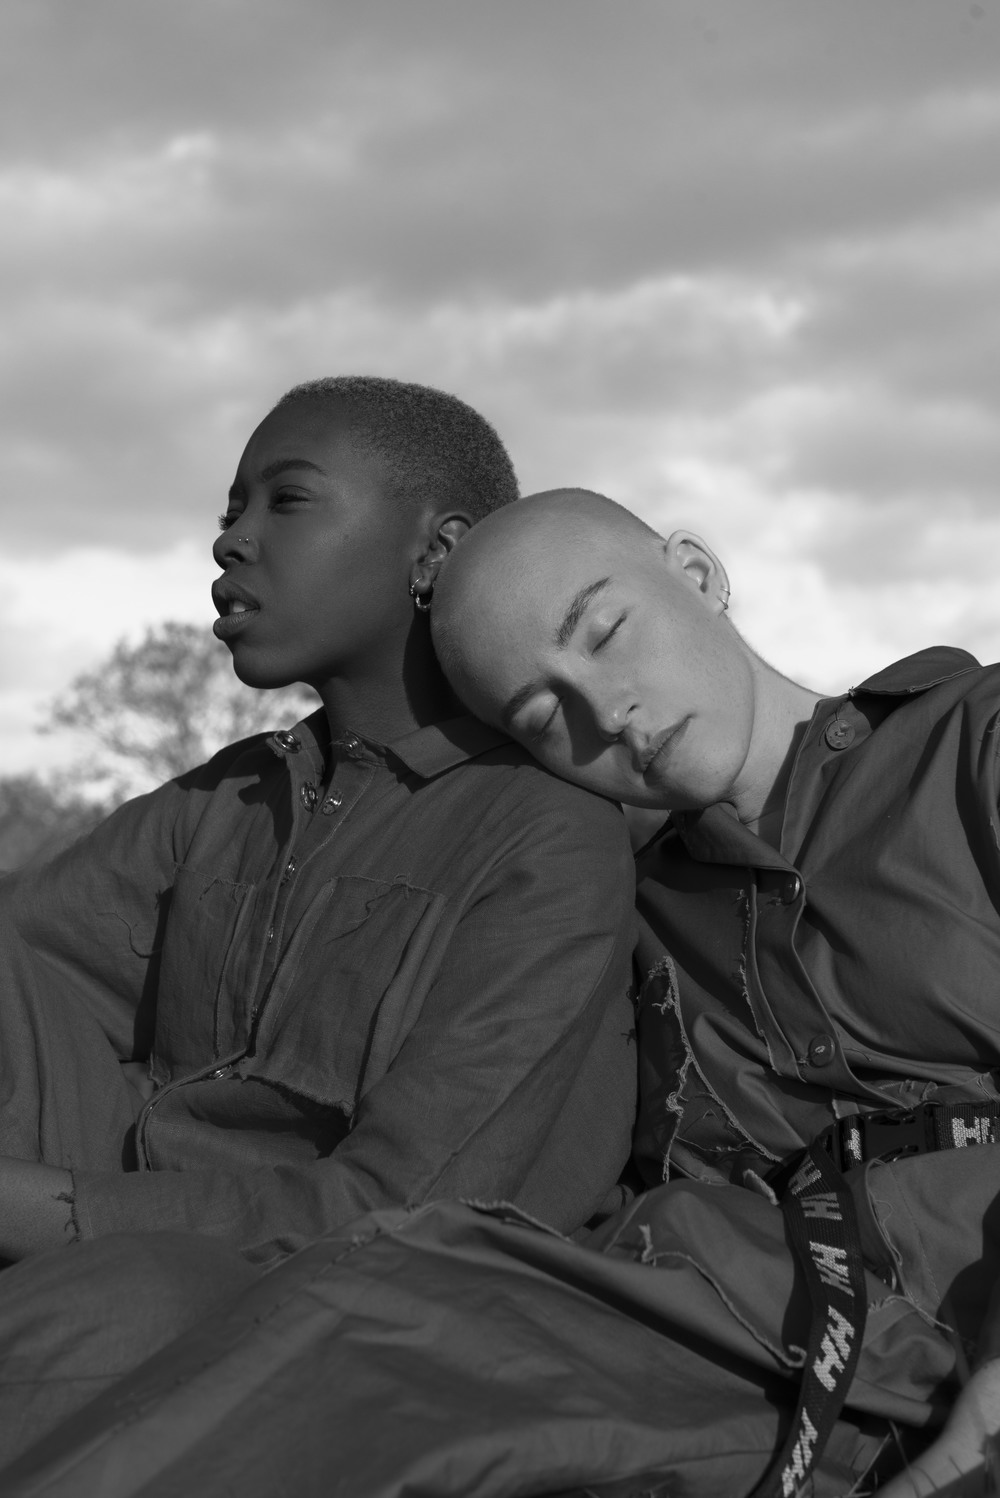 girlswillbeboys “SHE, WE” Exclusive Editorial